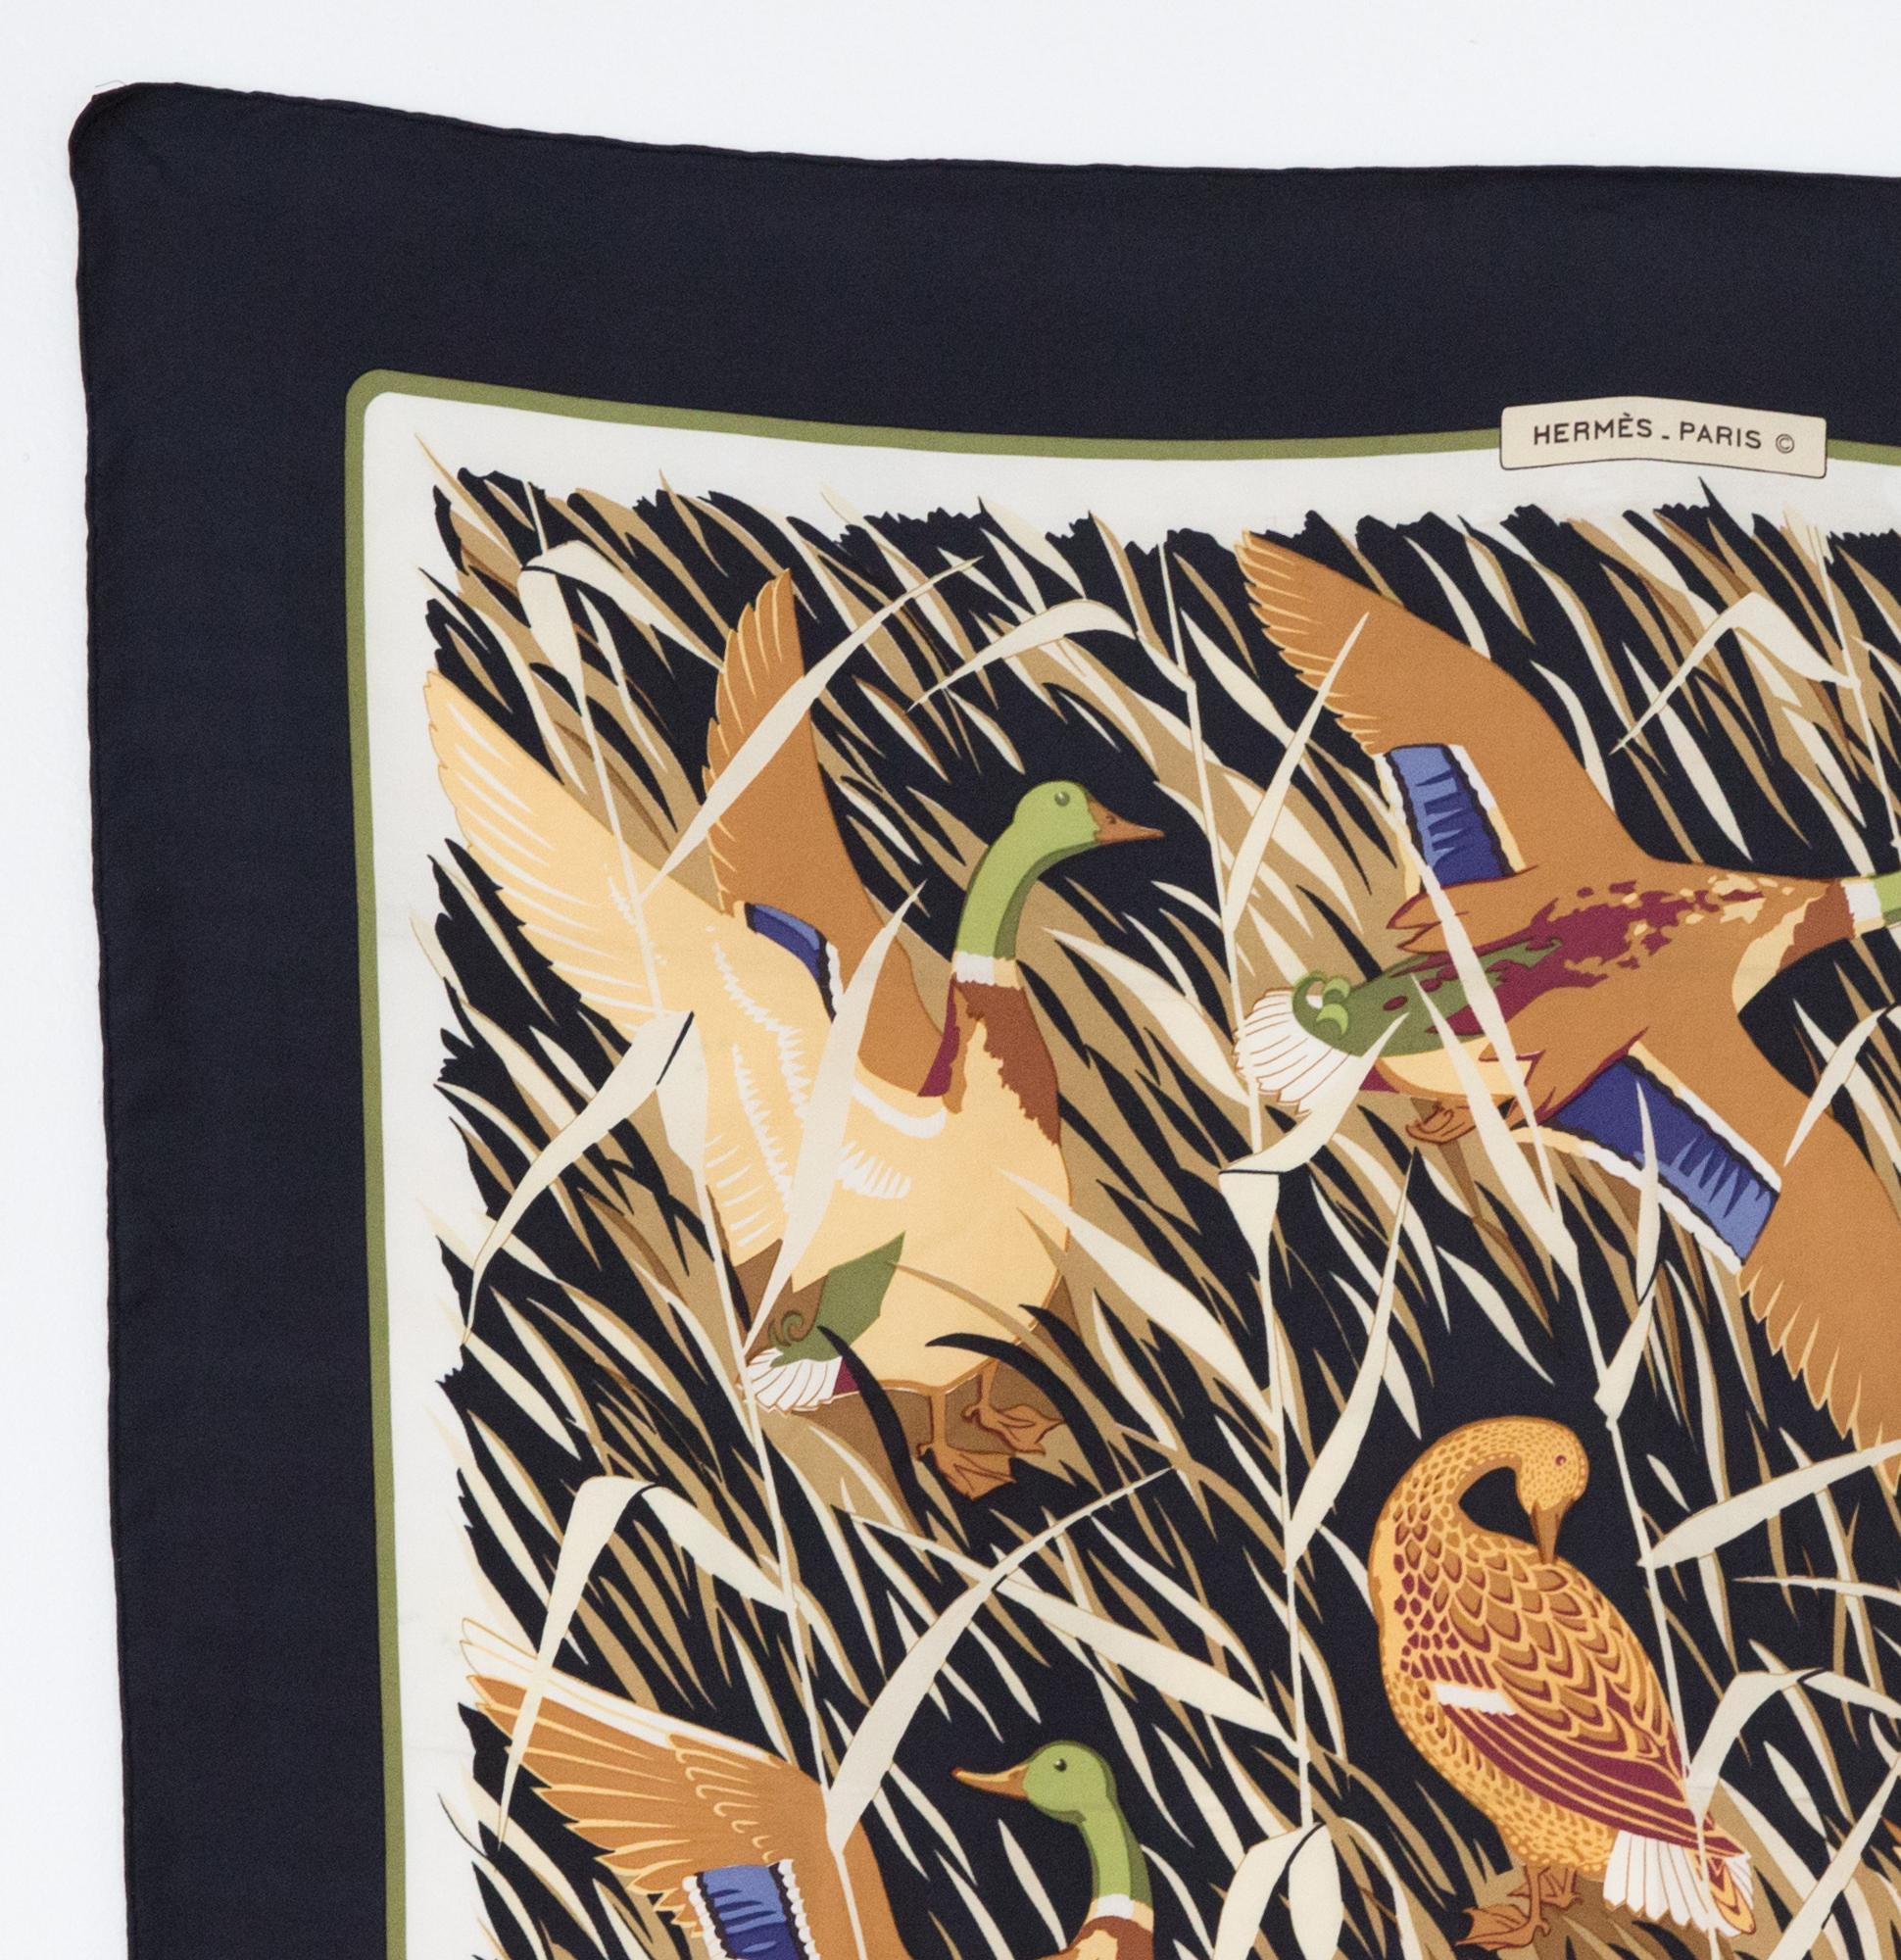 Hermes silk scarf Cols Verts by Christiane Vauzelles featuring a black border.
In excellent vintage condition. Made in France.
35,4in. (90cm)  X 35,4in. (90cm)
We guarantee you will receive this  iconic item as described and showed on